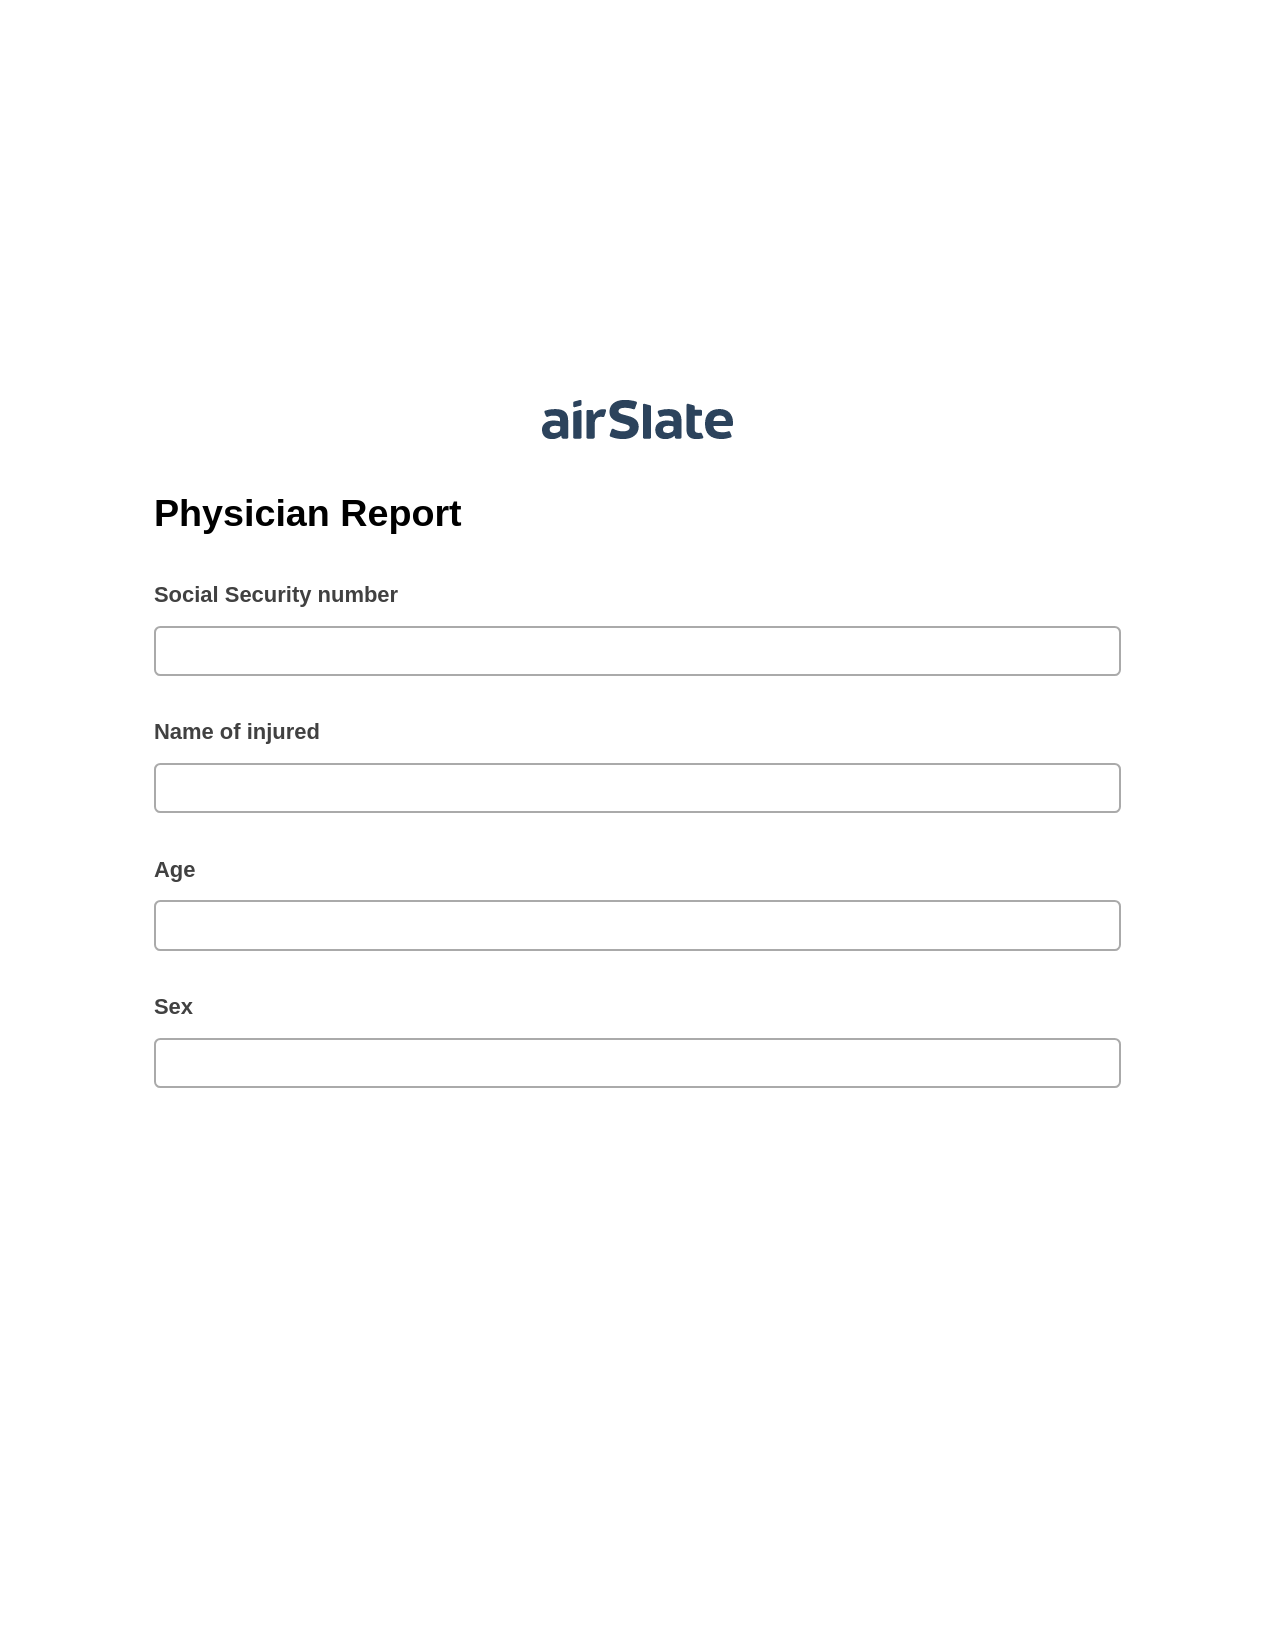 Physician Report Pre-fill from Excel Spreadsheet Bot, Send Mailchimp Campaign Bot, Export to Excel 365 Bot